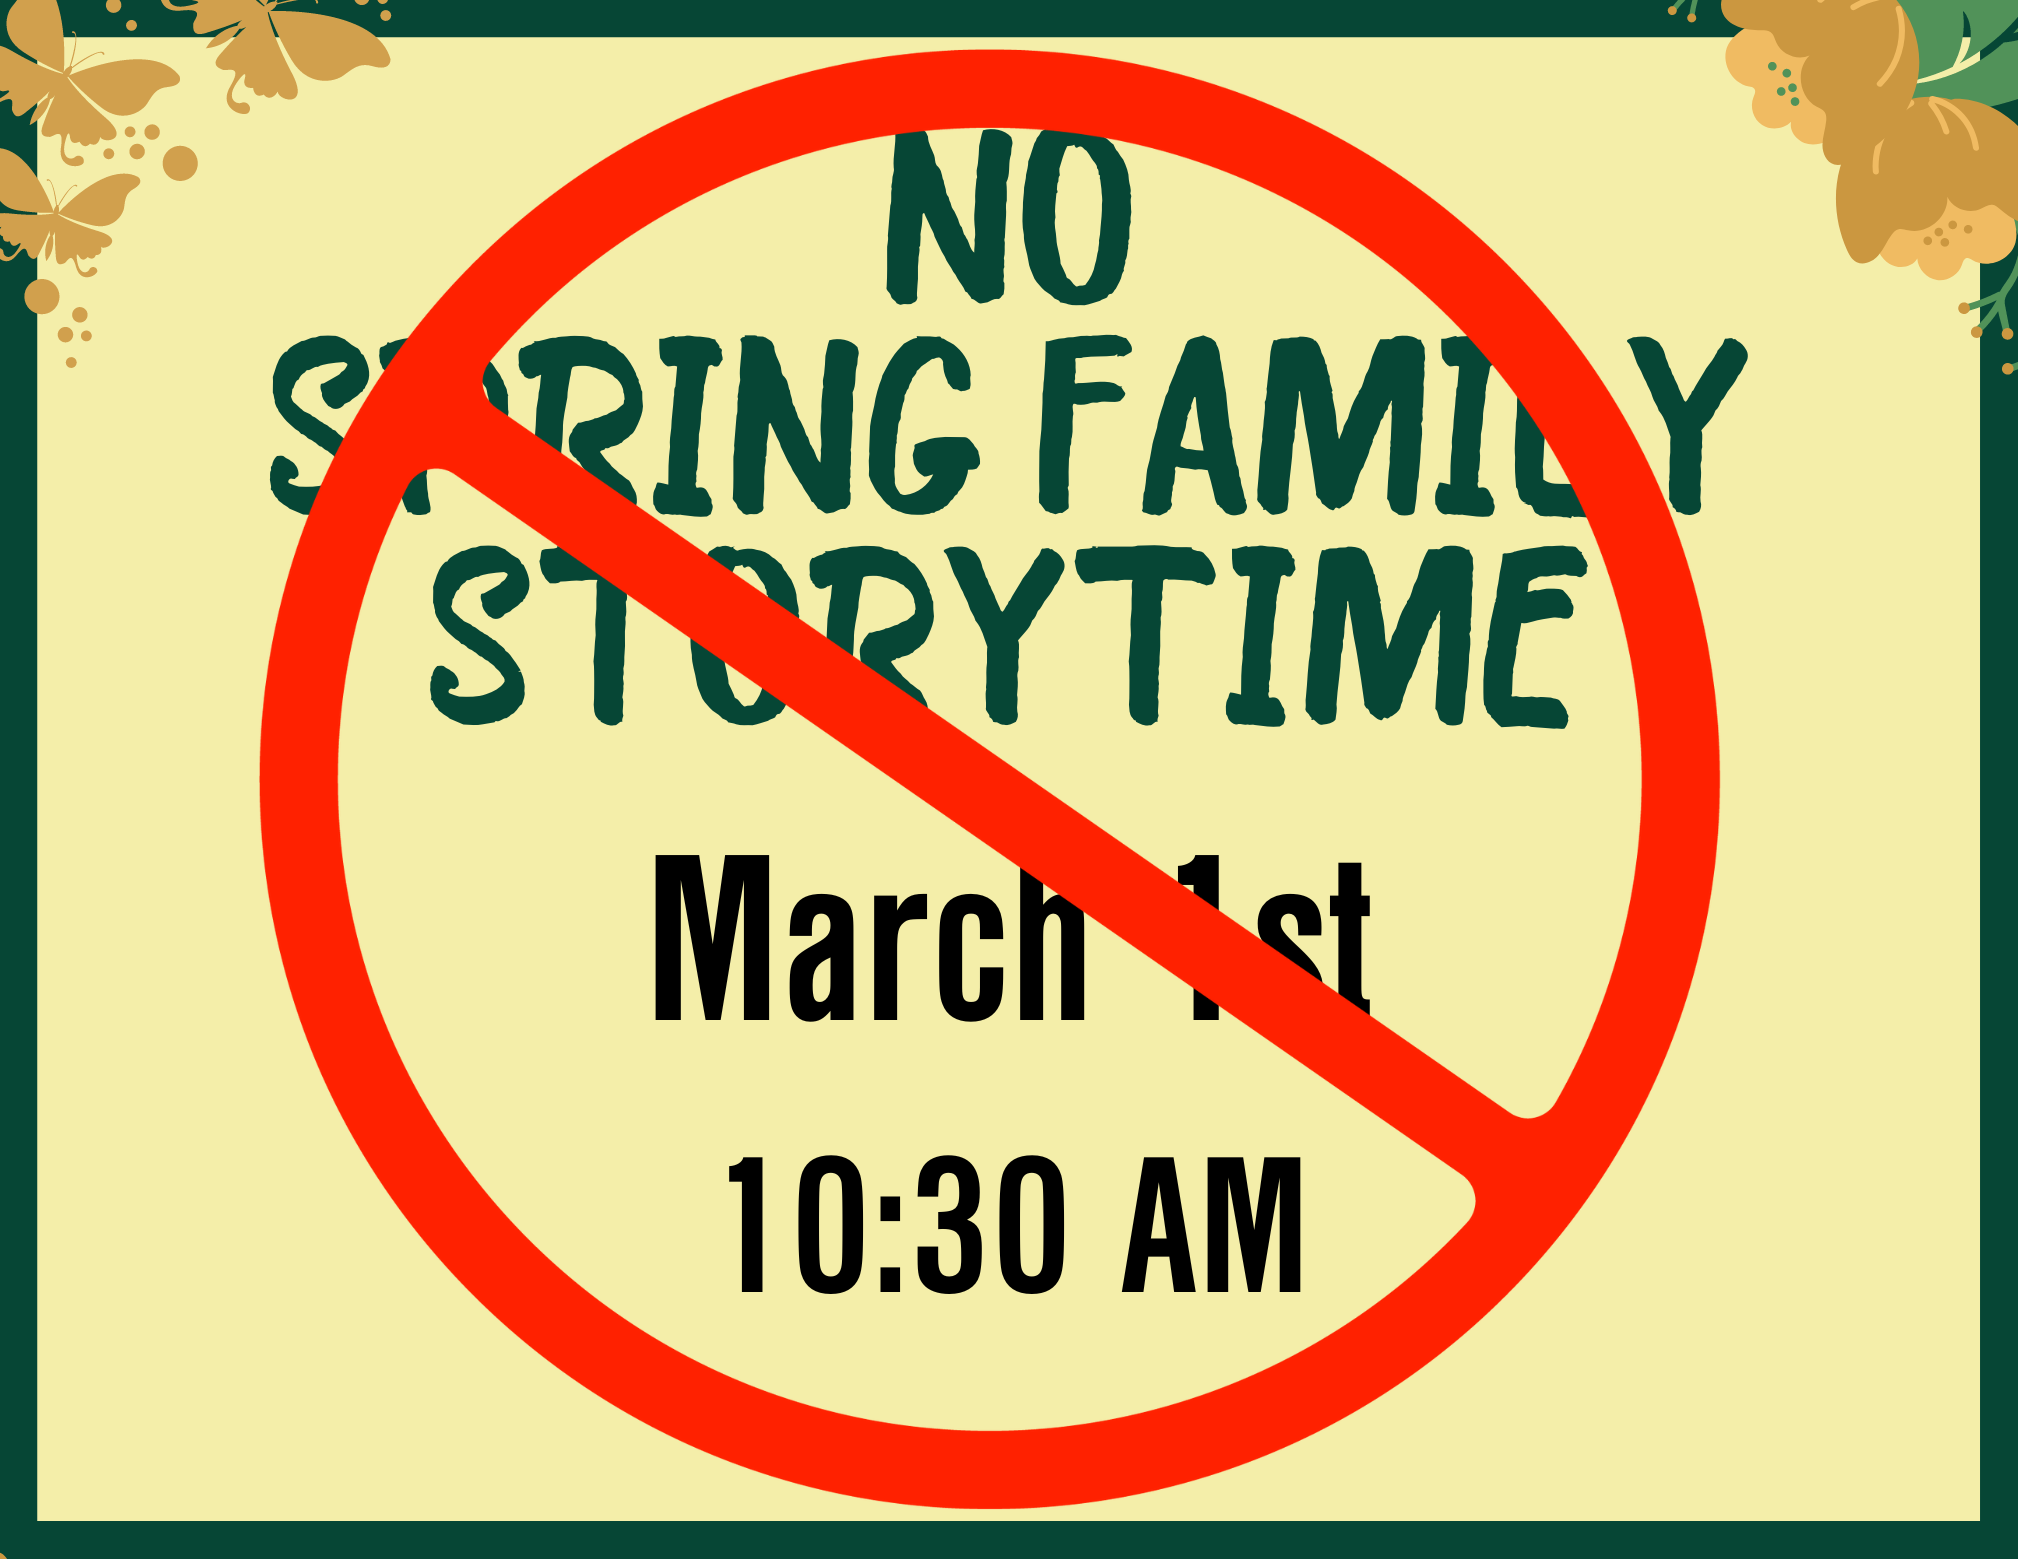 No Spring Family Storytime March 1st 10:30 AM